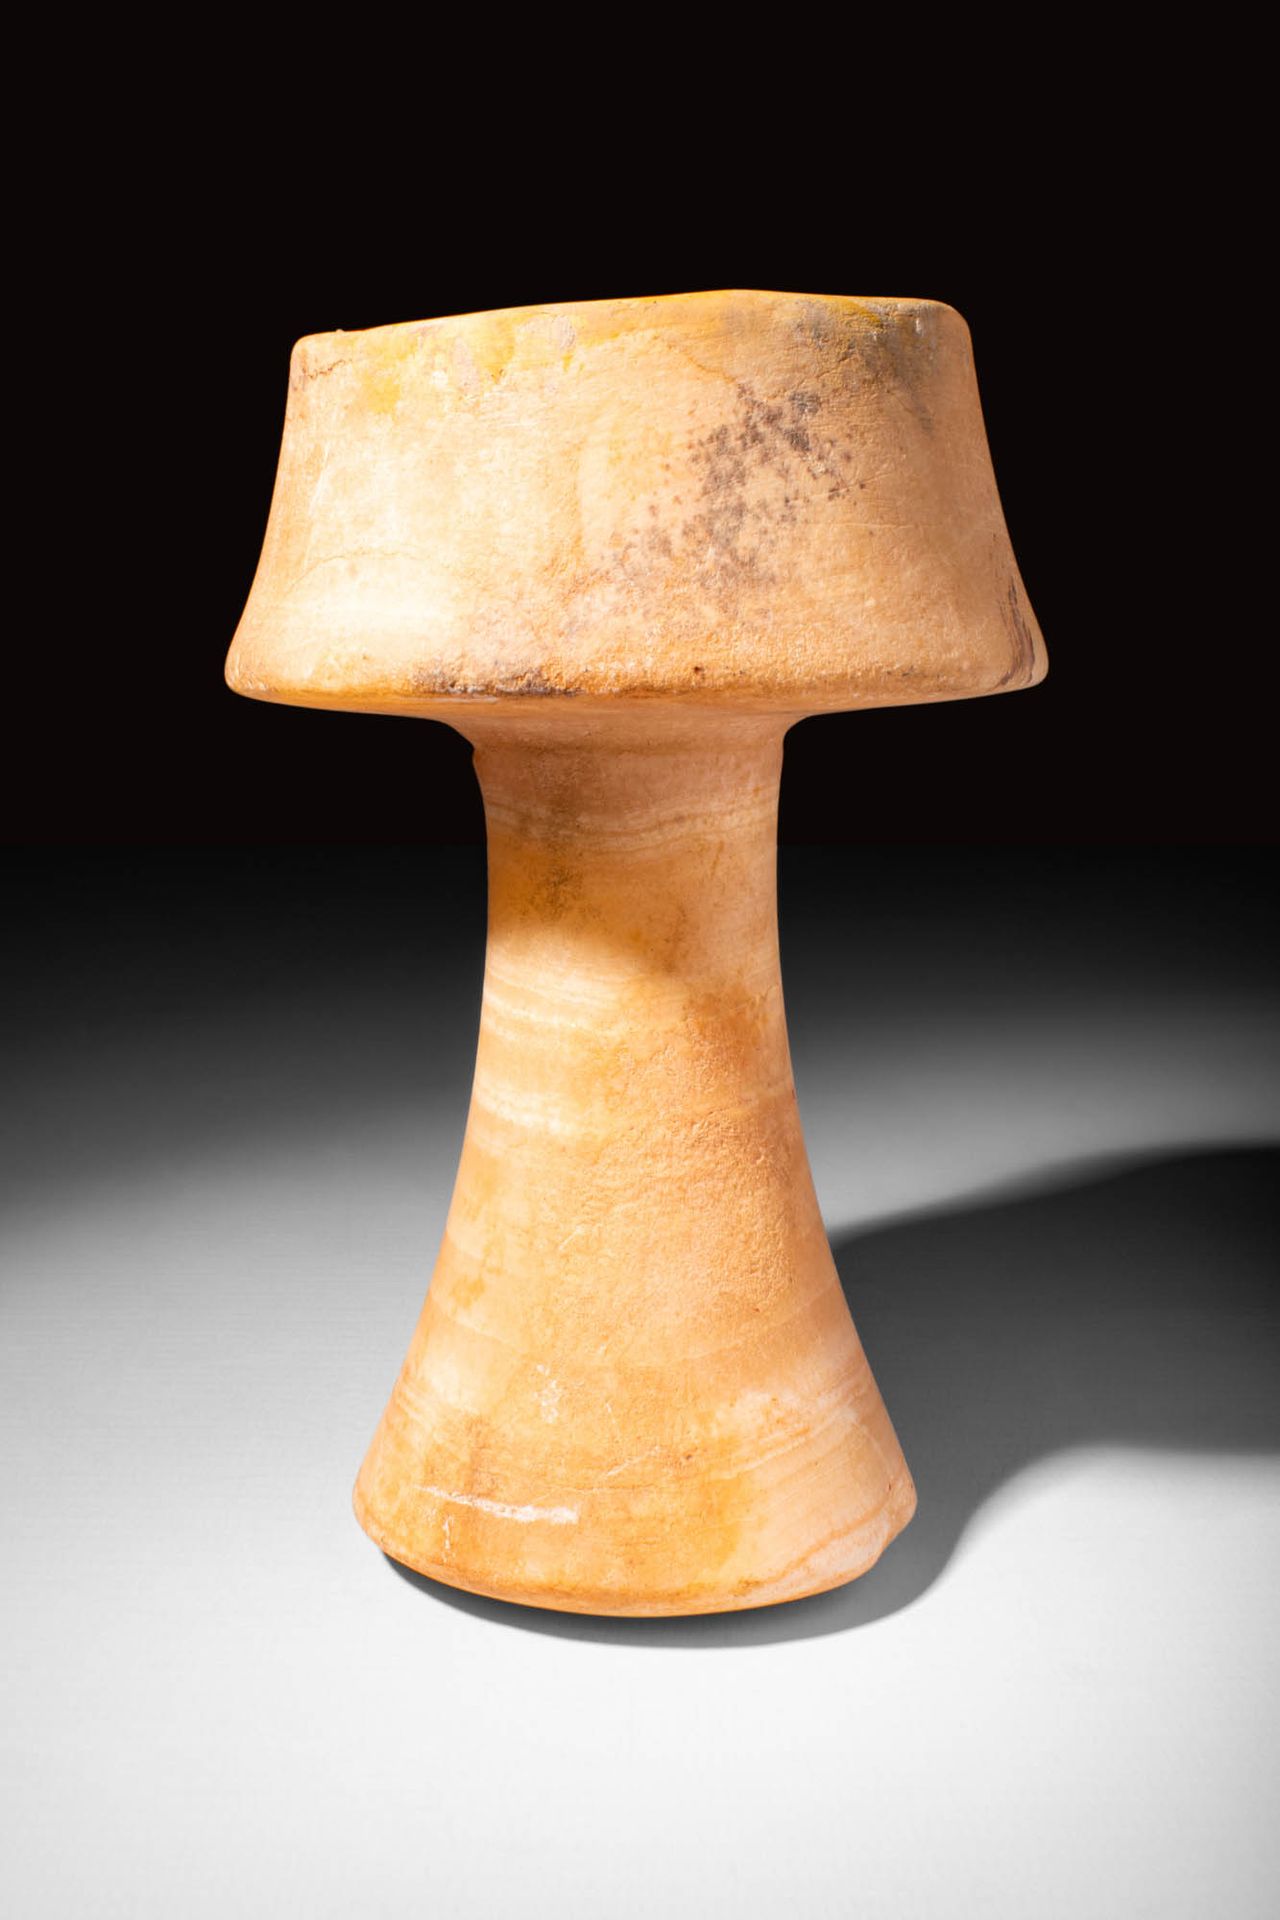 RARE BACTRIAN ALABASTER CHALICE Ca. 2300 - 1800 BC.
A rare Bactrian alabaster ch&hellip;